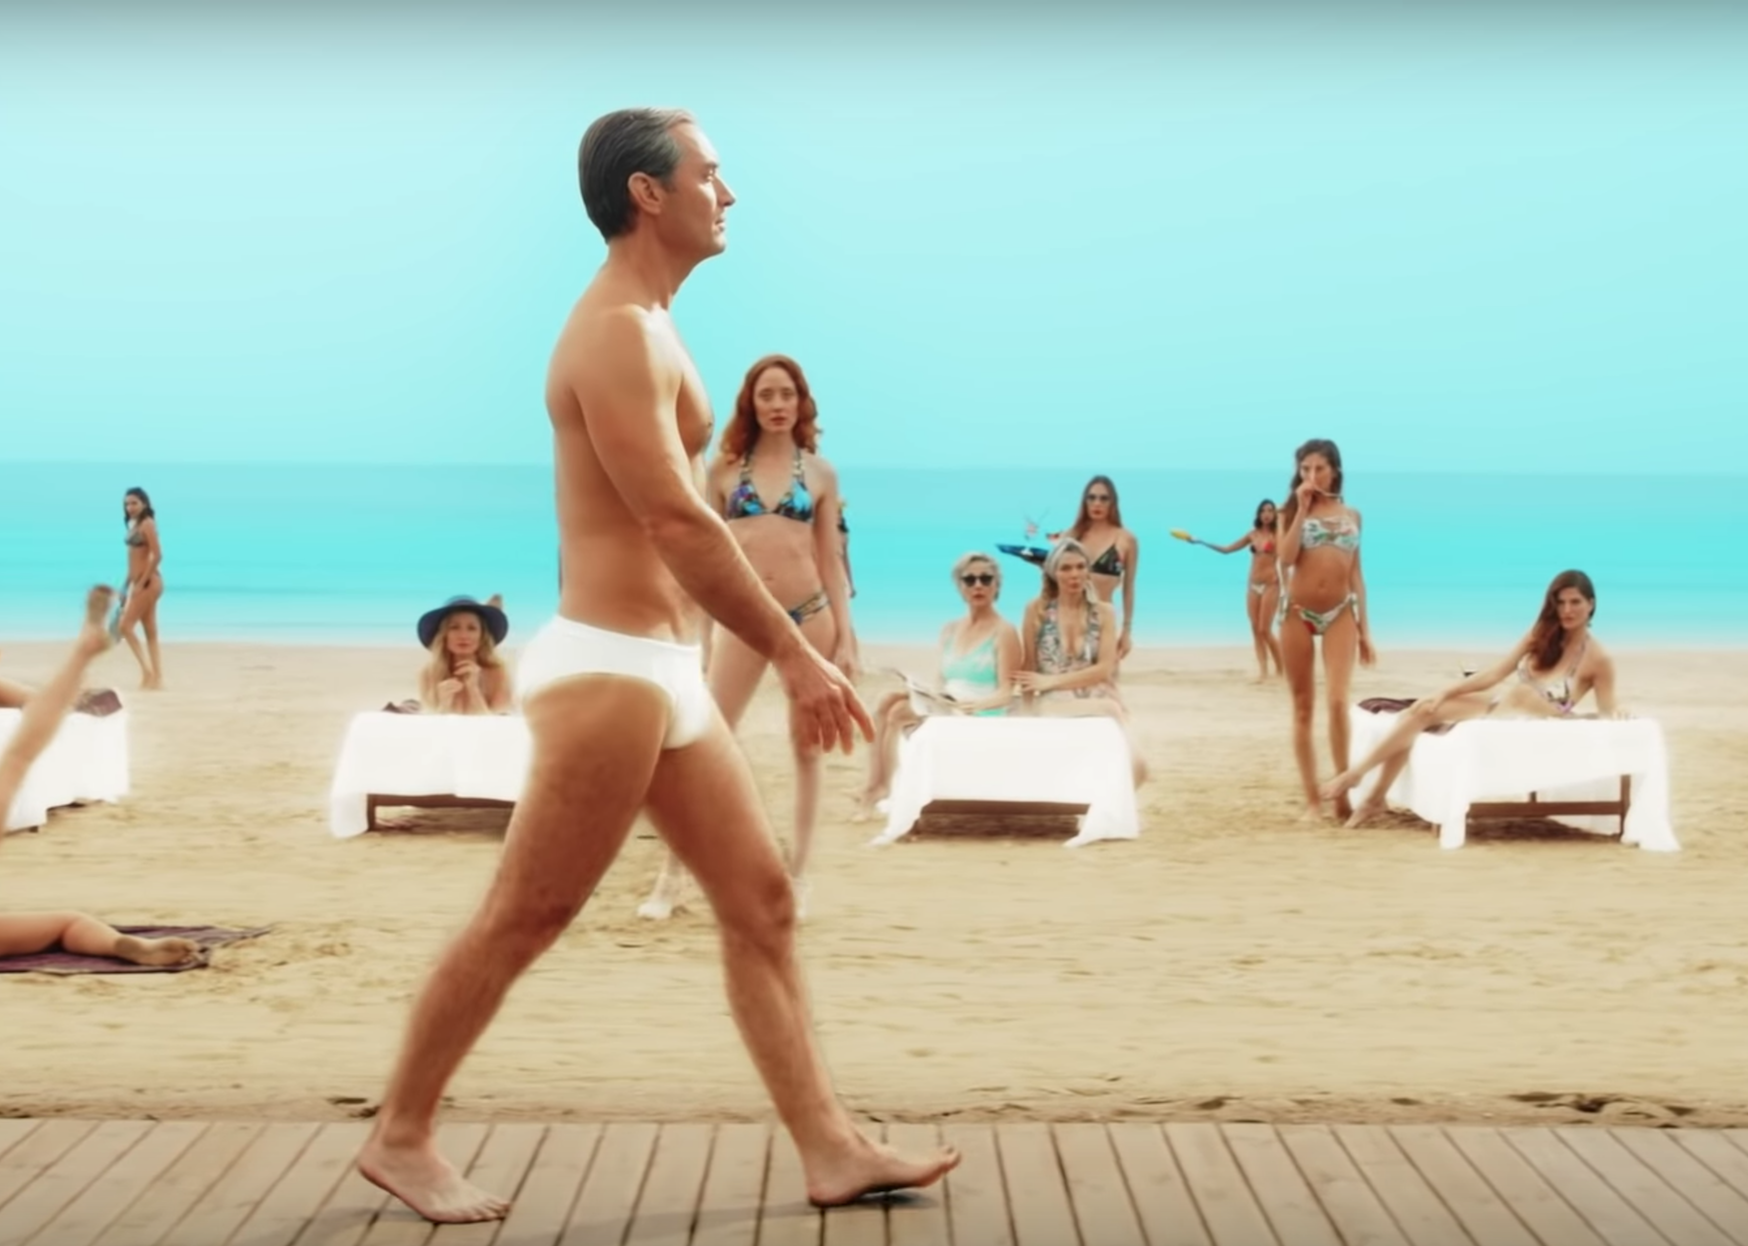 Nude Beach Erection Speedo - Jude Law could make all of us become good catholics - QUEERGURU